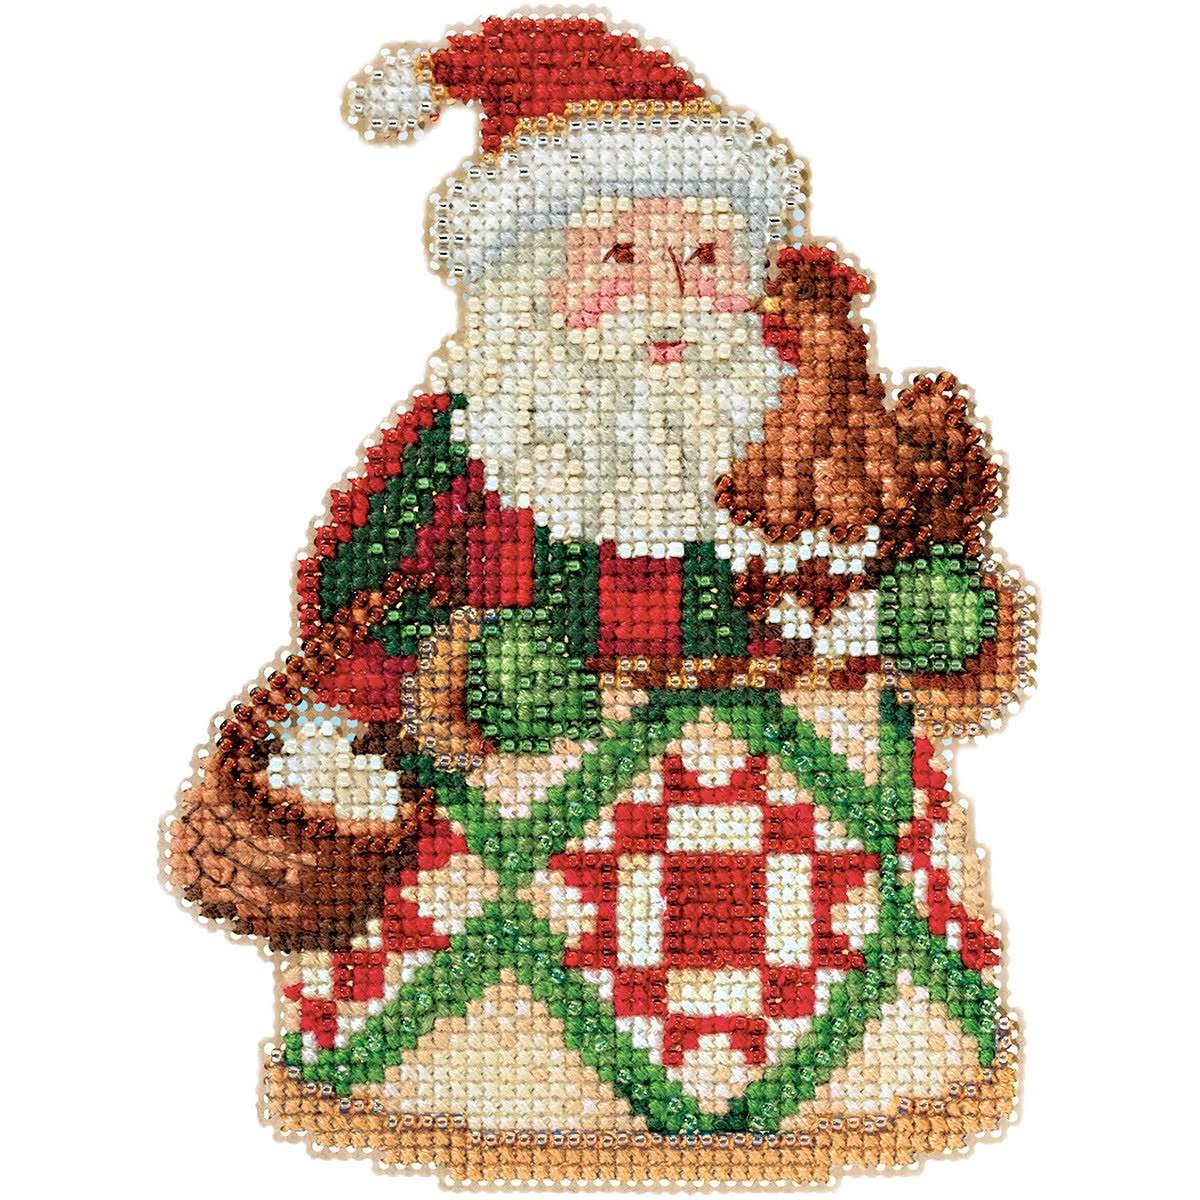 Jim Shore Early Morning Santa Counted Cross Stitch Kit 5"x5" 18 Count